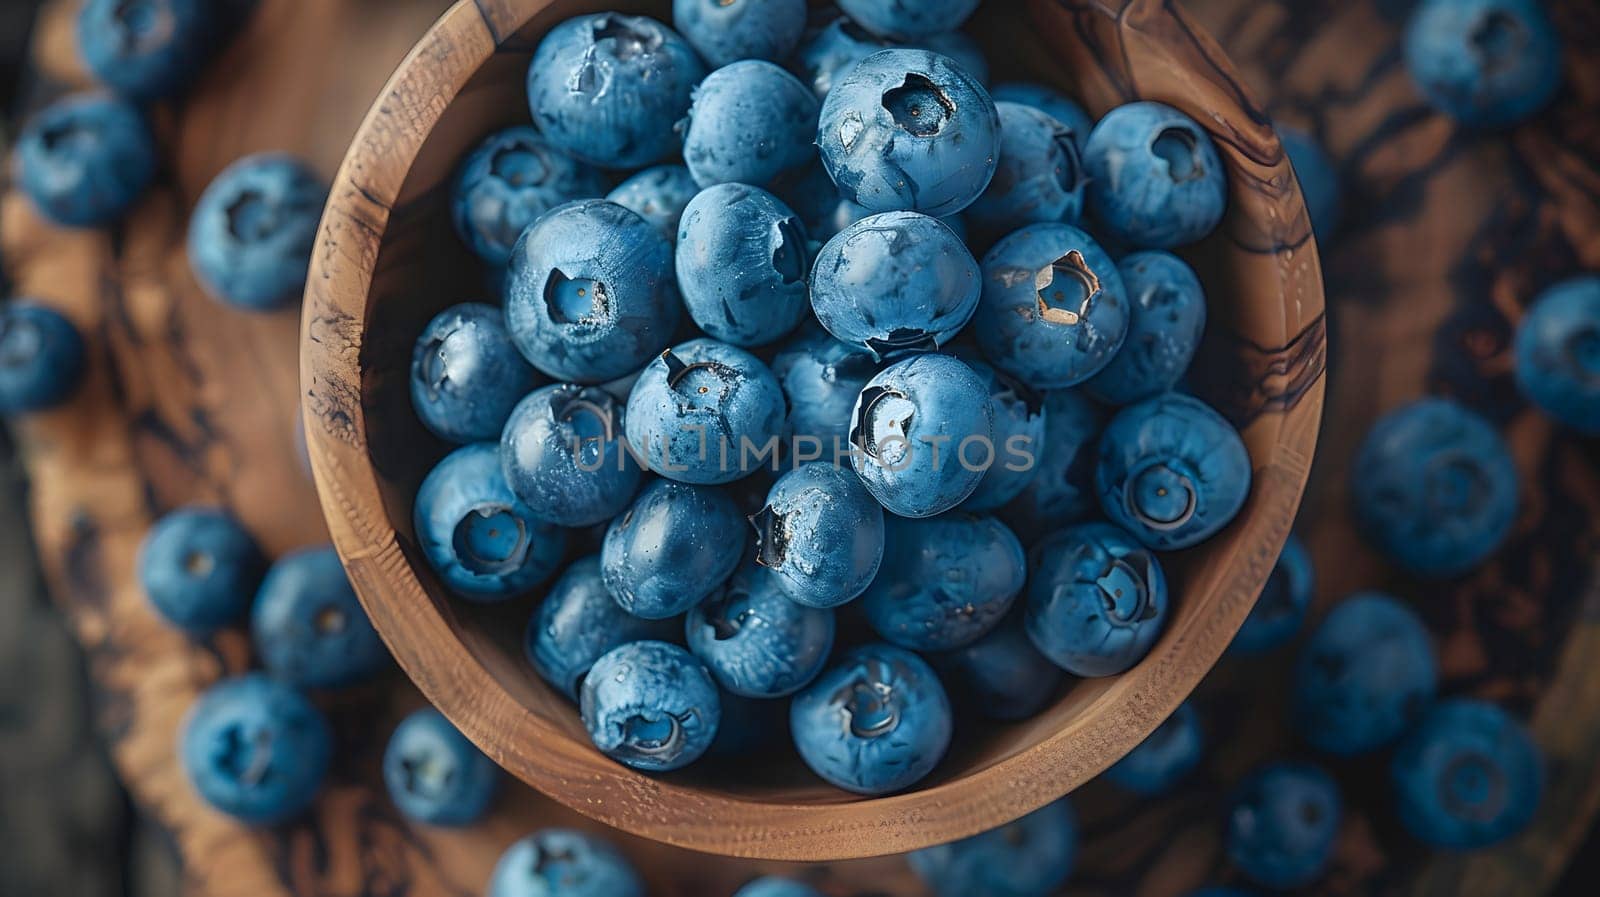 A wooden table is adorned with a wooden bowl overflowing with vibrant blueberries. The azure fruit, a seedless gift from nature, creates a beautiful display of natural foods